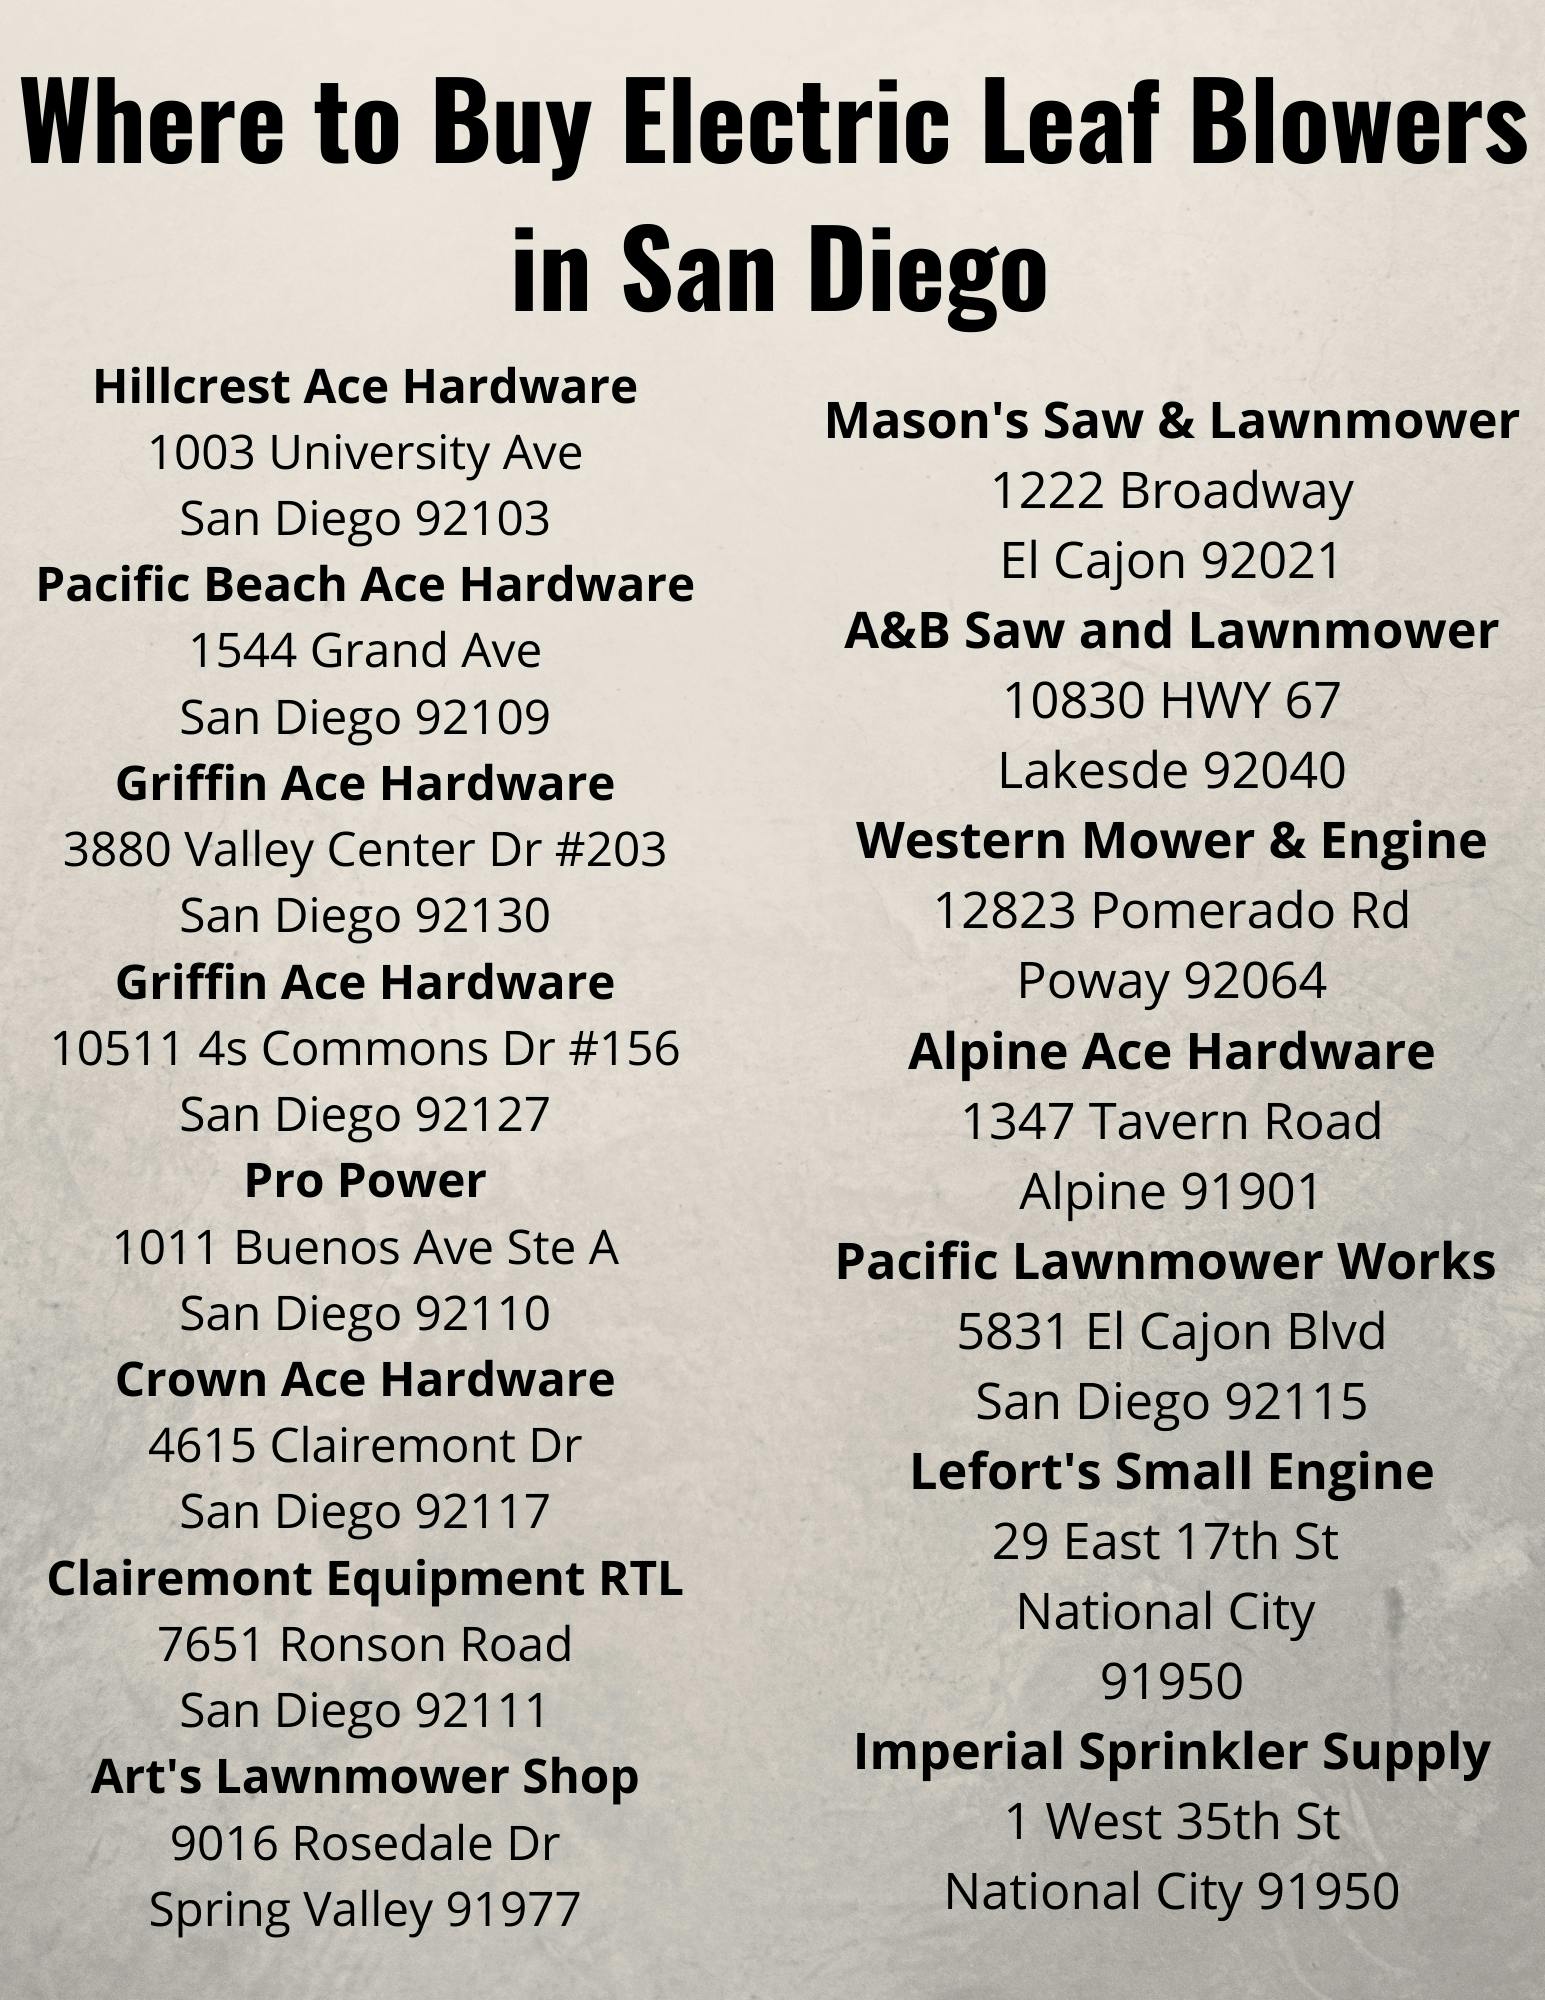 Where to Buy Electric Leaf Blowers in San Diego.jpg